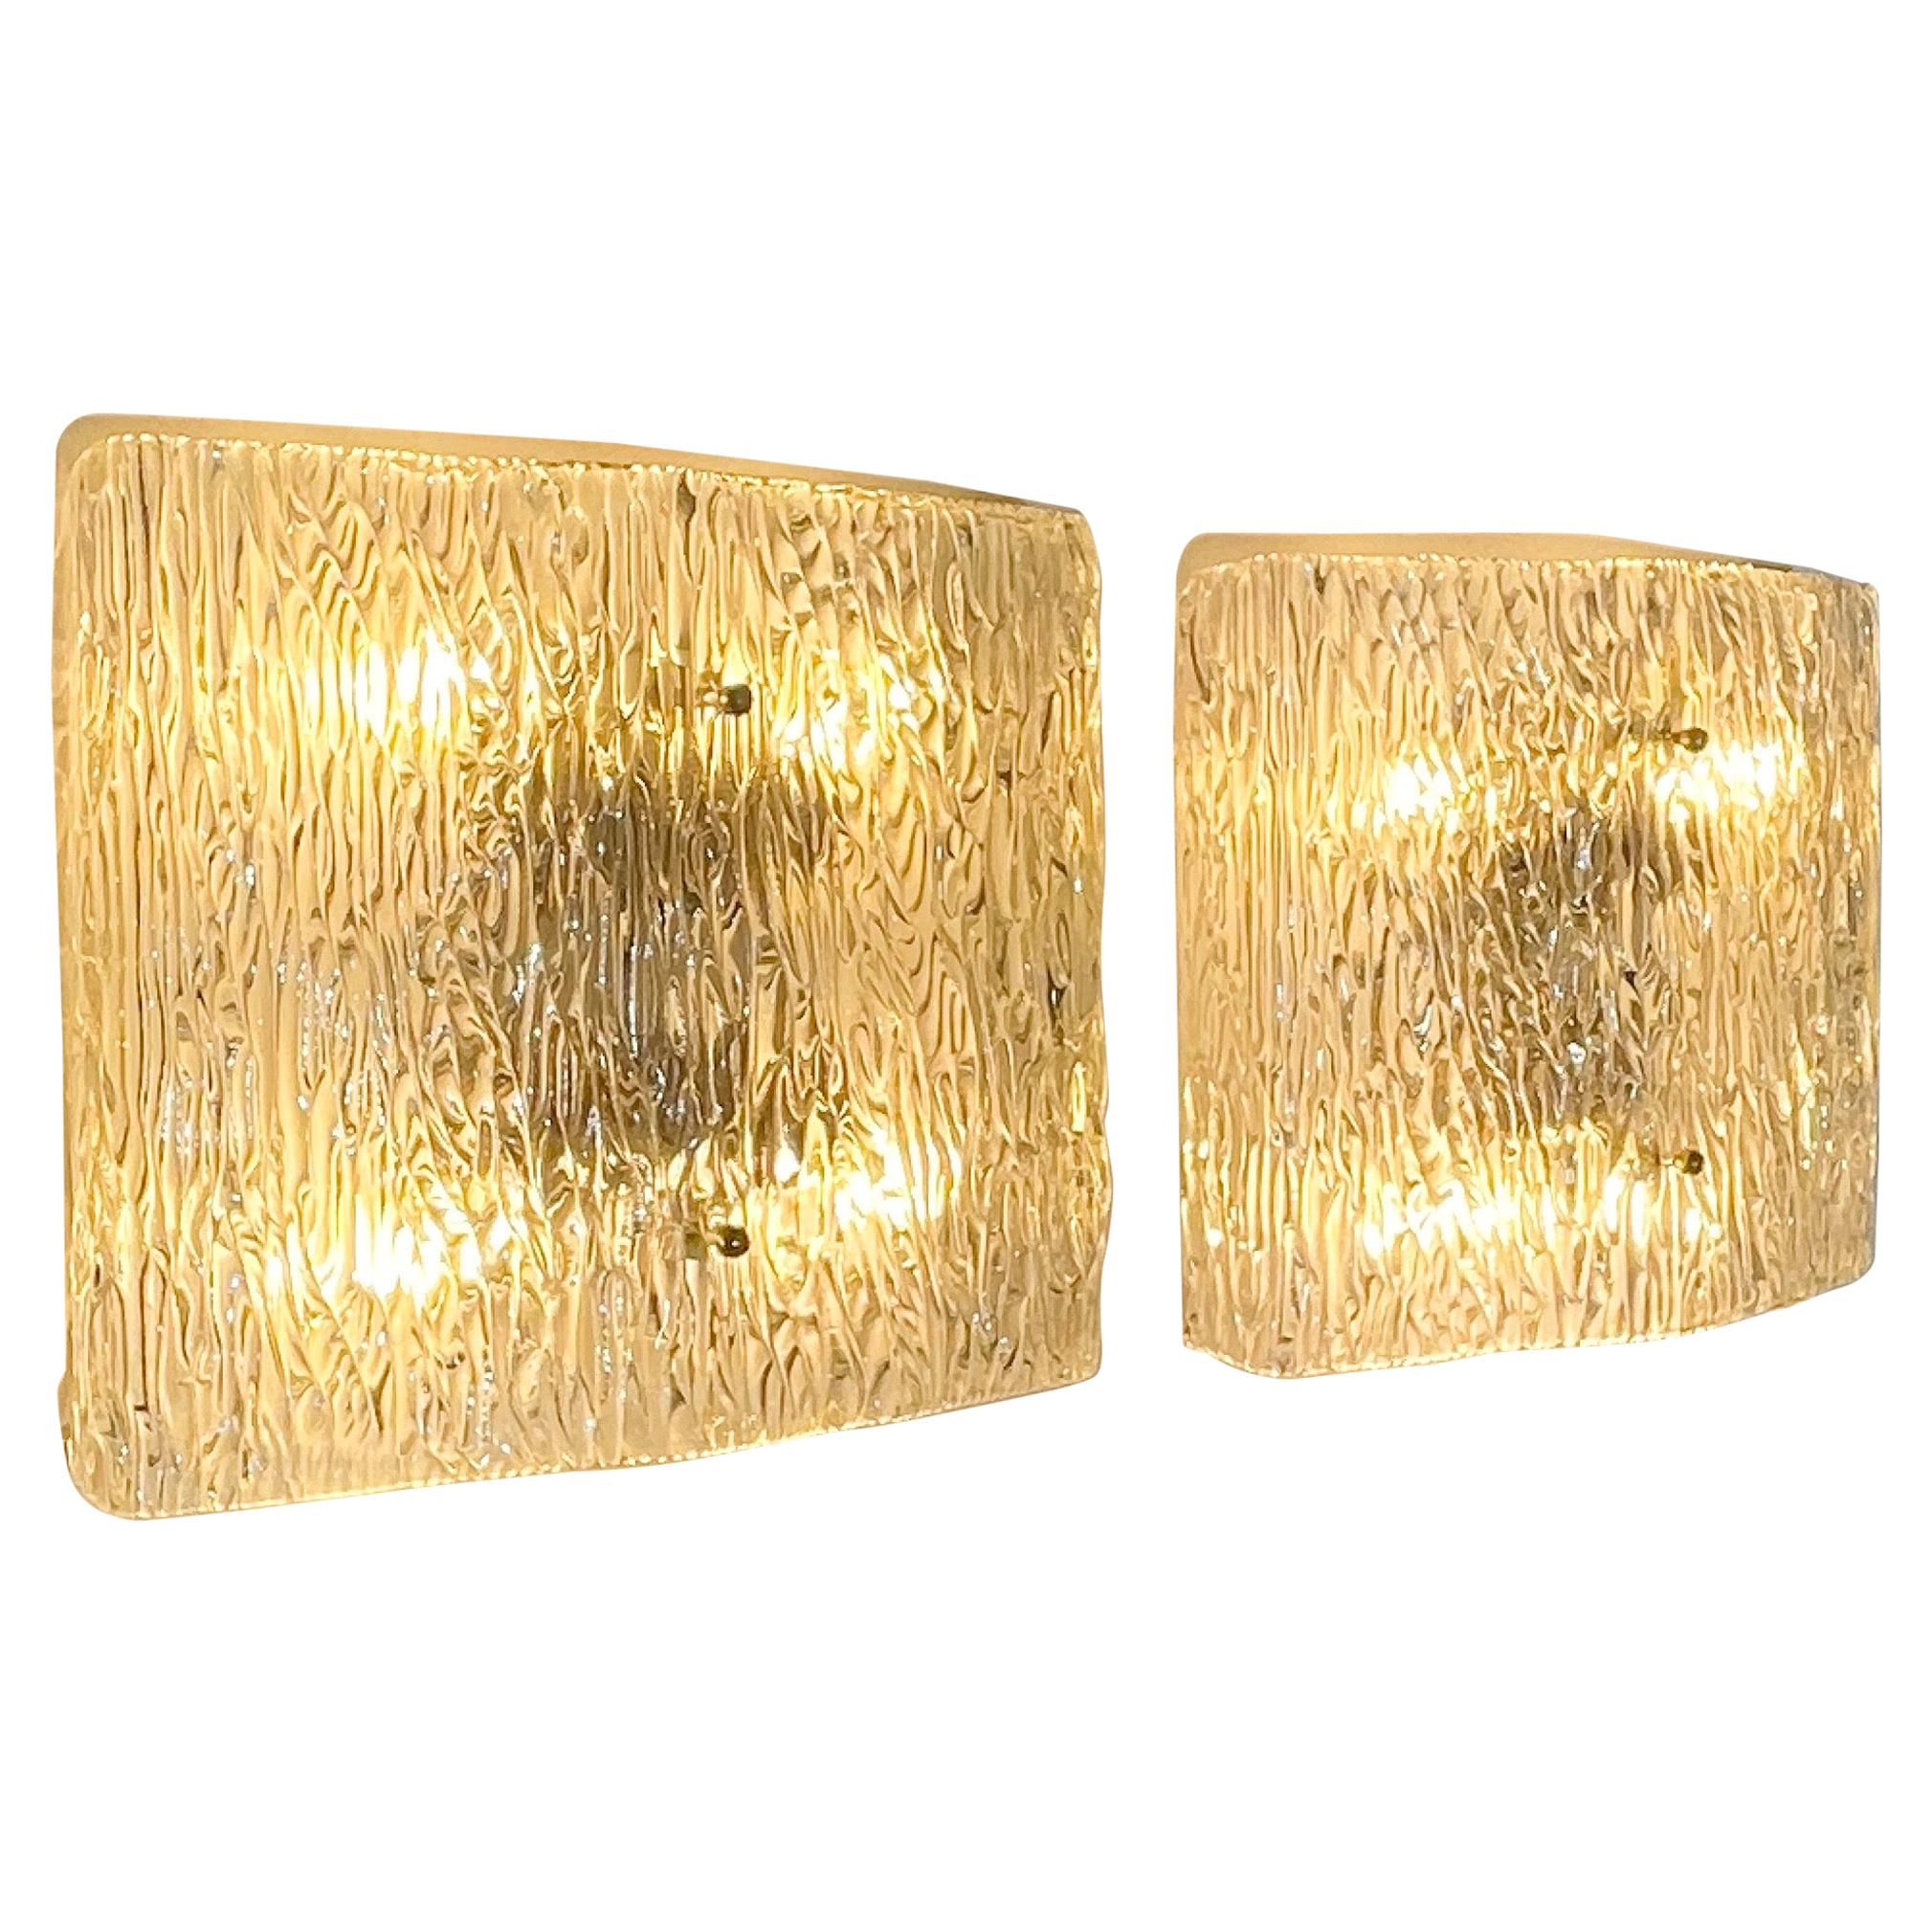 German Pair of Very Large Murano Glass Wall Sconces by Kaiser, circa 1960s